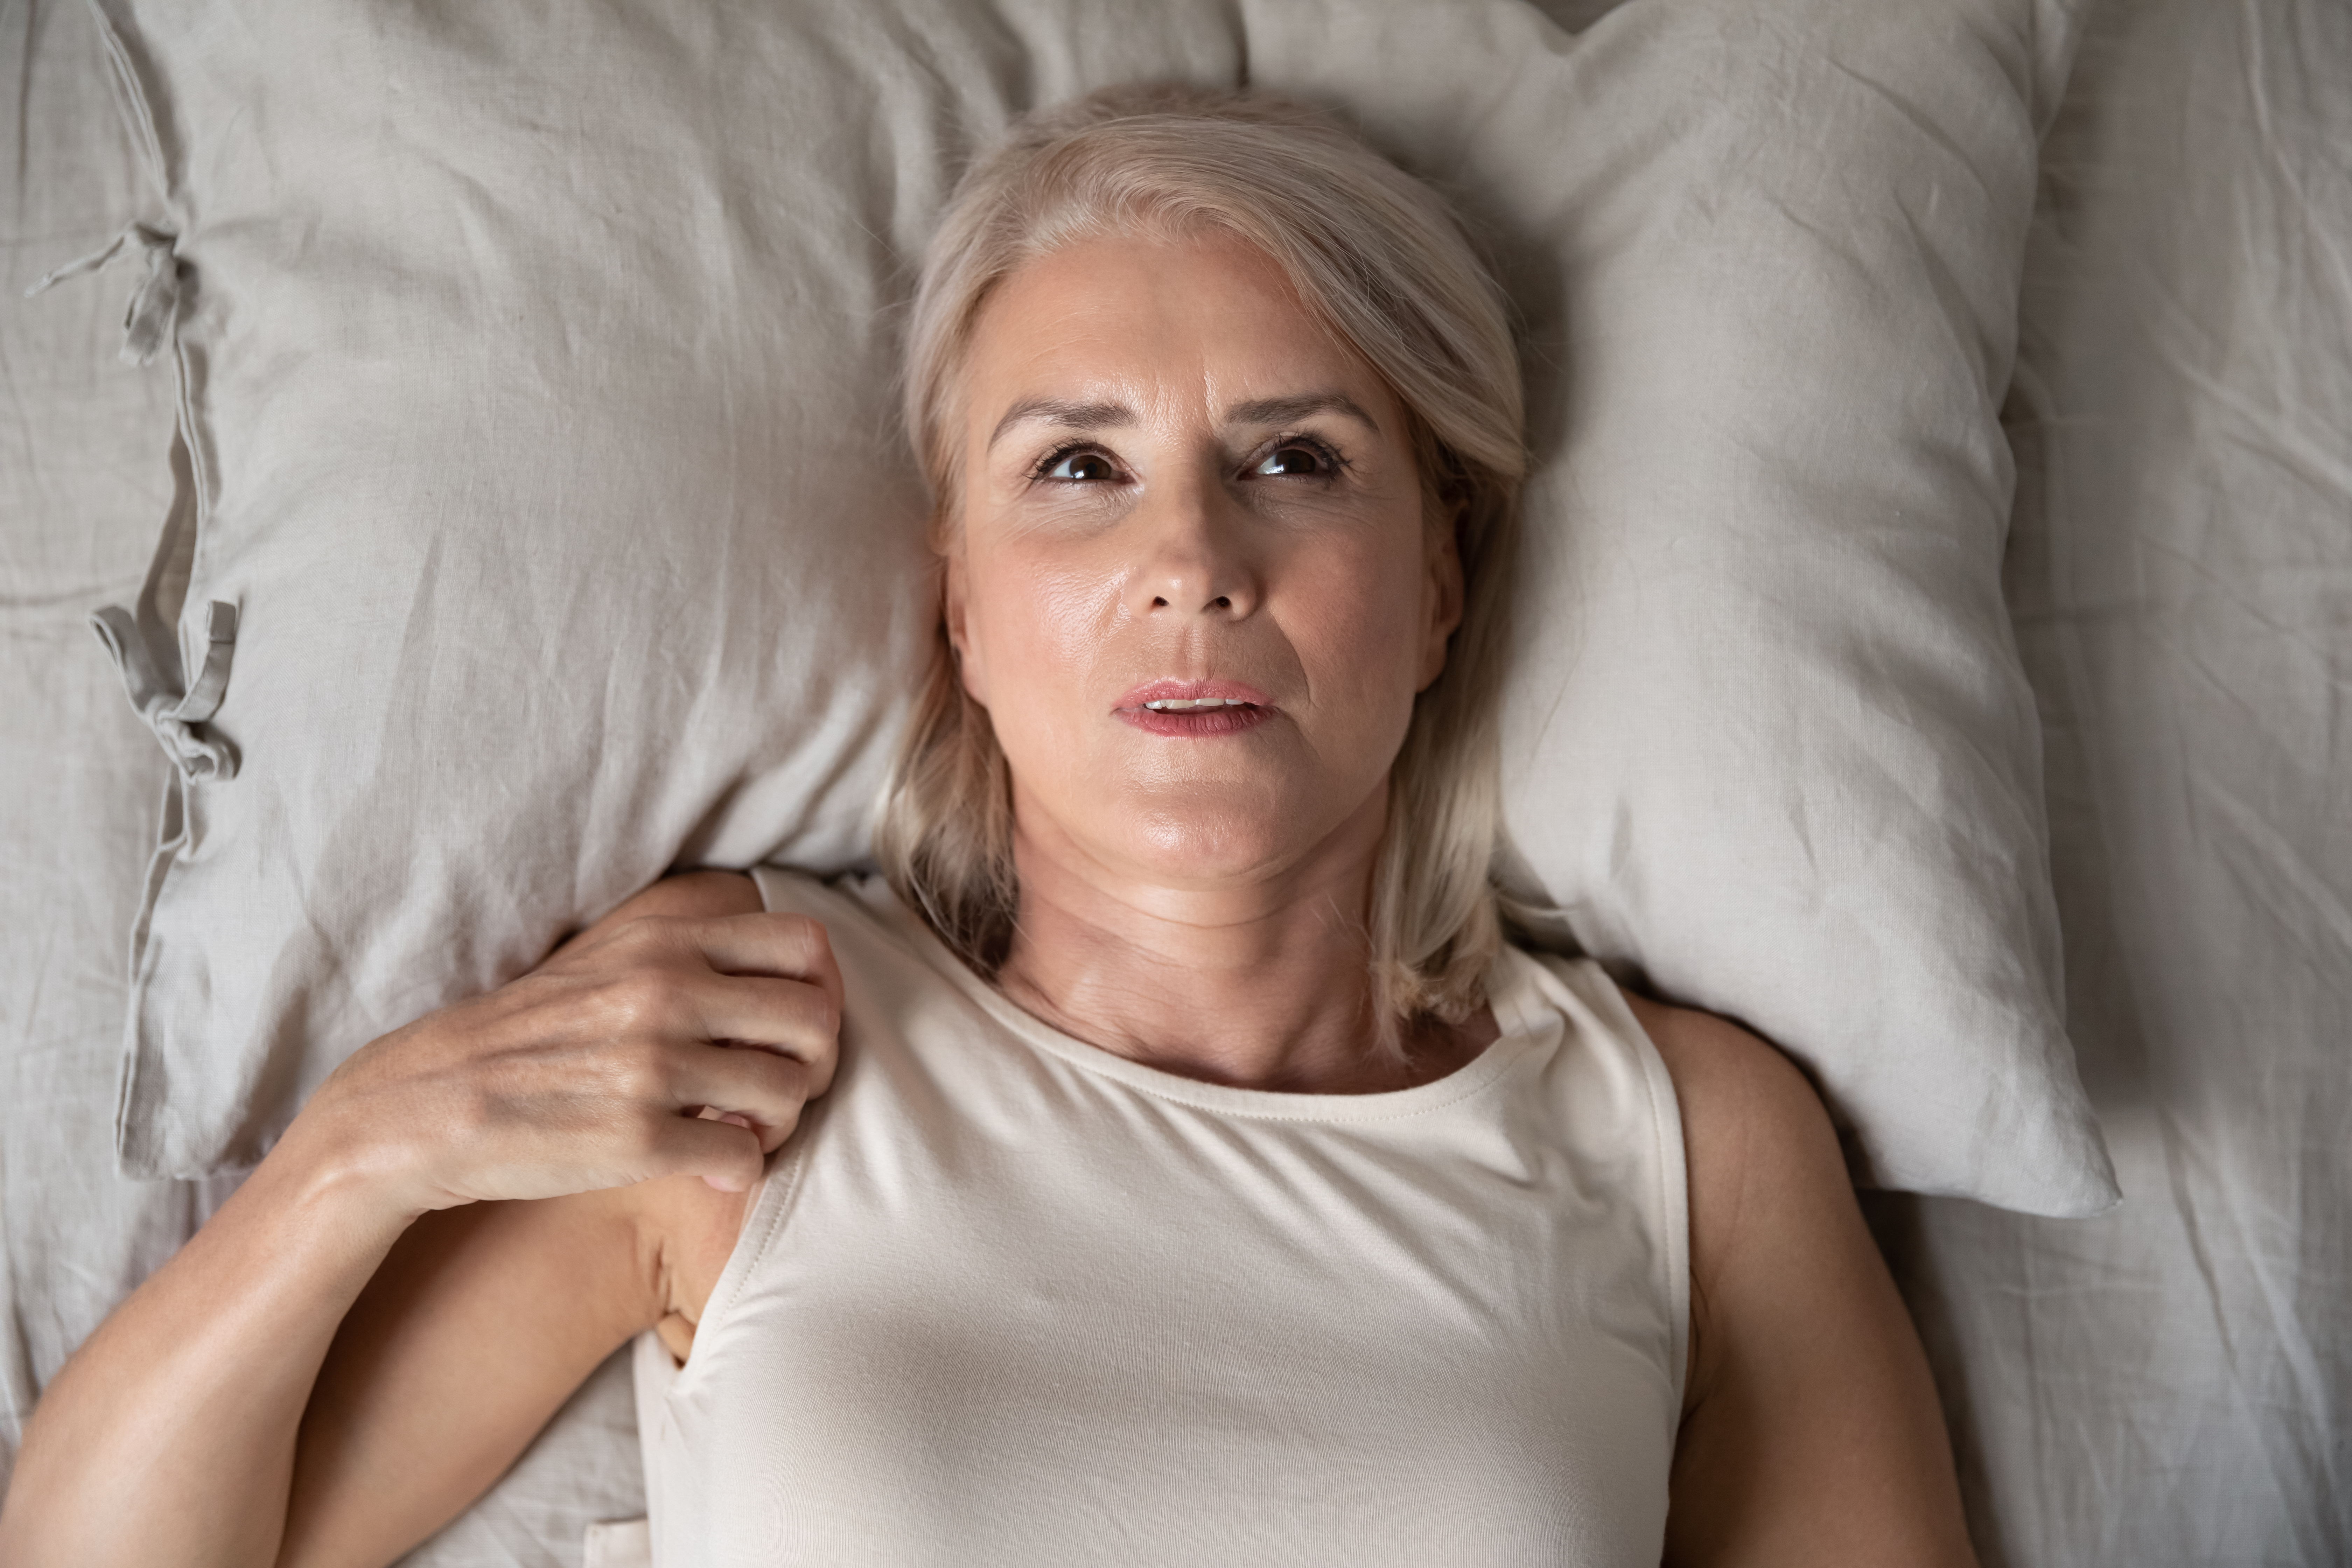 A woman laying in bed awake | Source: Shutterstock